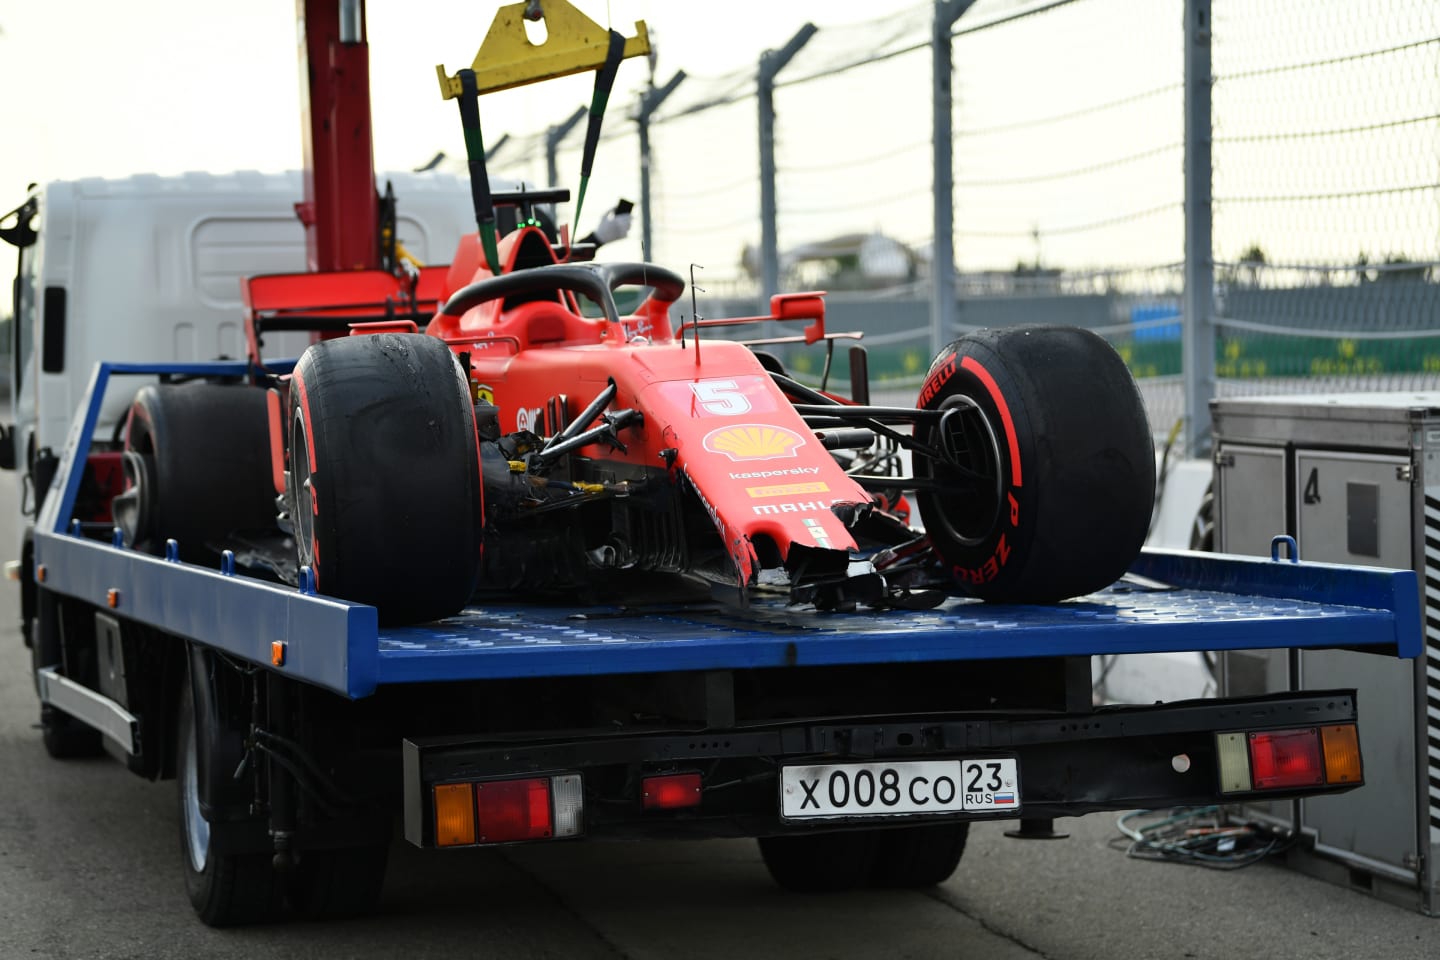 SOCHI, RUSSIA - SEPTEMBER 26: The broken car of Sebastian Vettel of Germany and Ferrari is seen on a pick up truck as it is transported back to the garage after crashing during qualifying ahead of the F1 Grand Prix of Russia at Sochi Autodrom on September 26, 2020 in Sochi, Russia. (Photo by Dan Mullan/Getty Images)